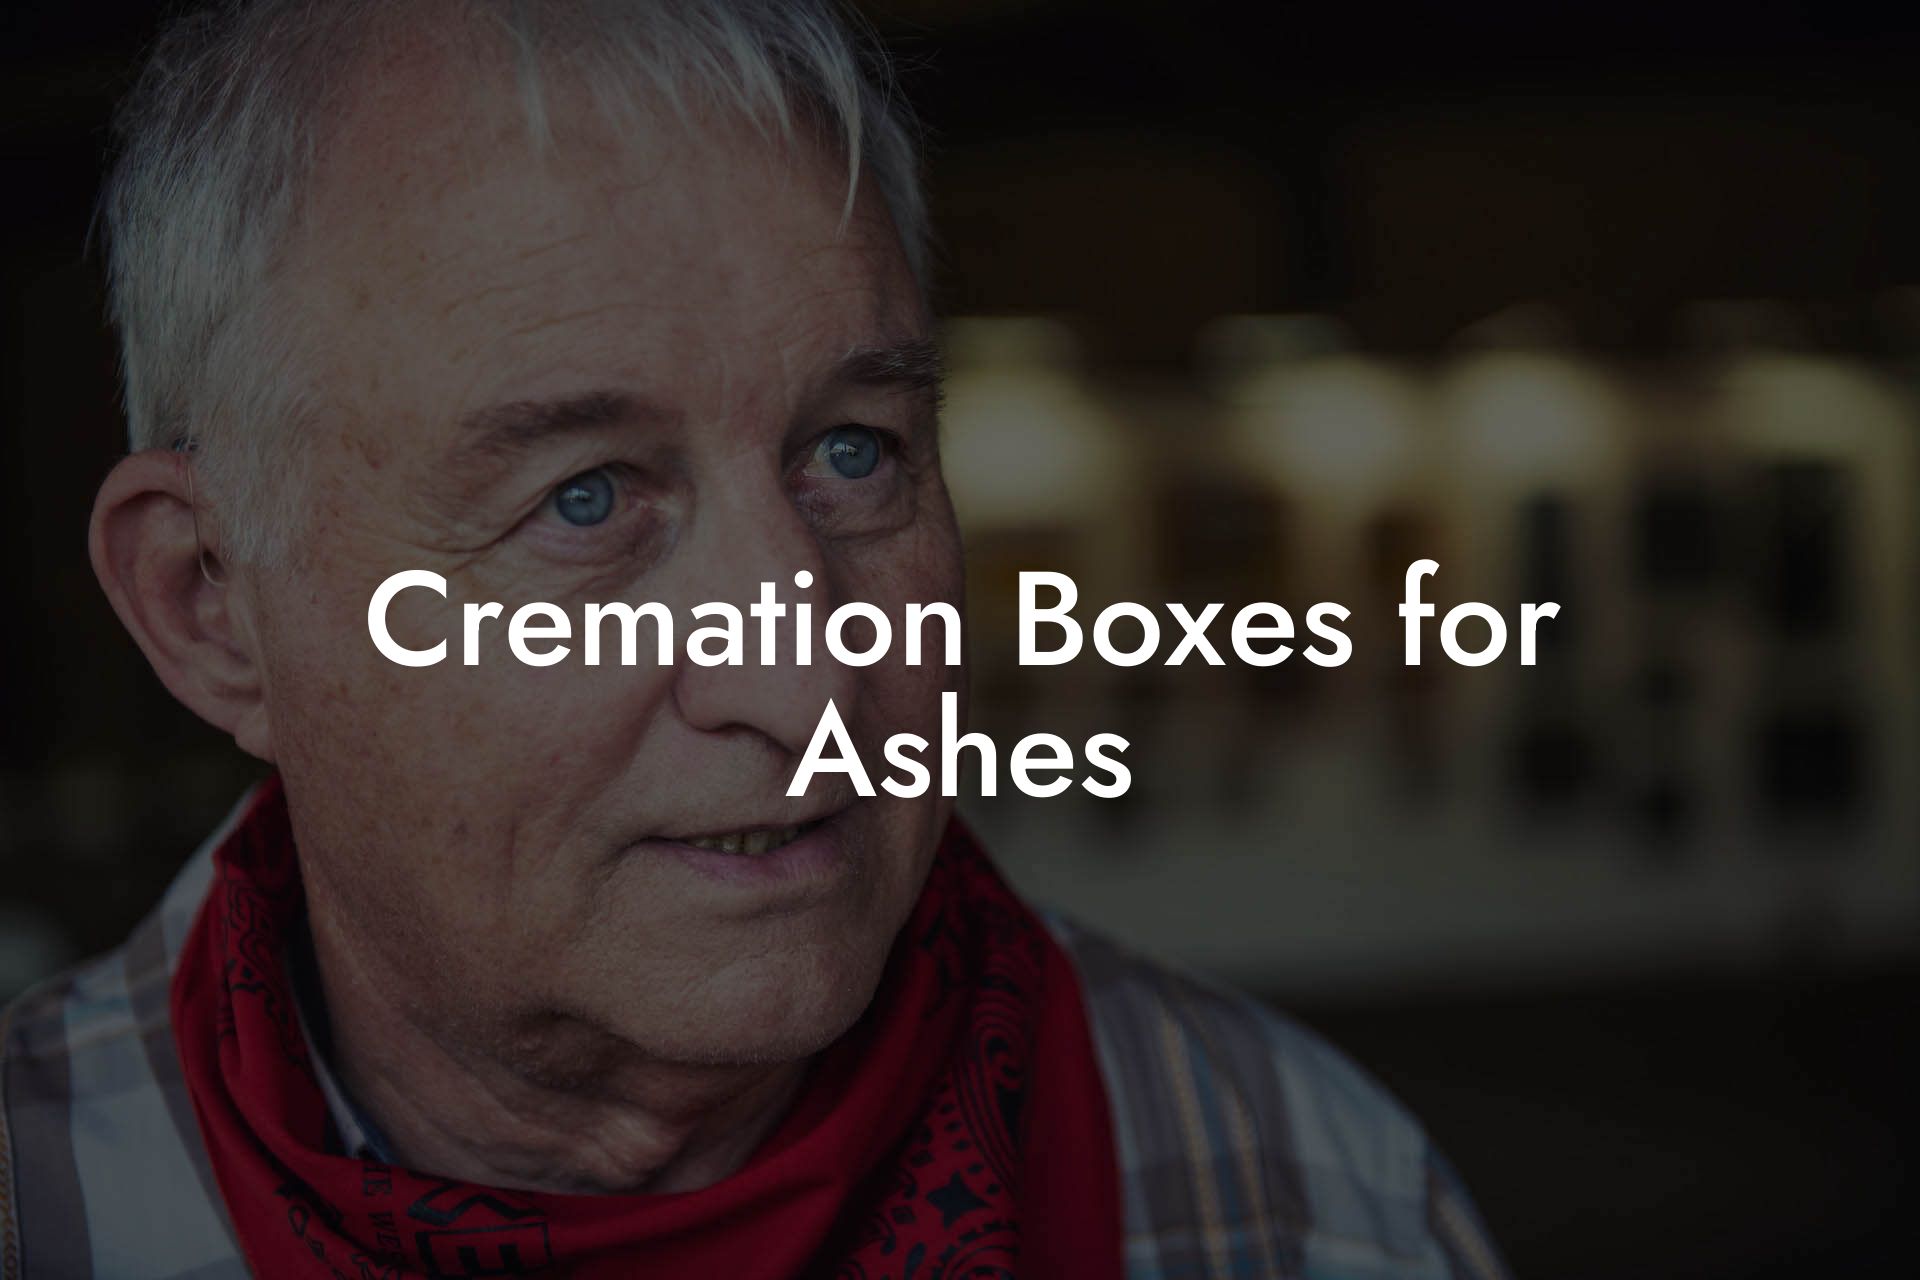 Cremation Boxes for Ashes